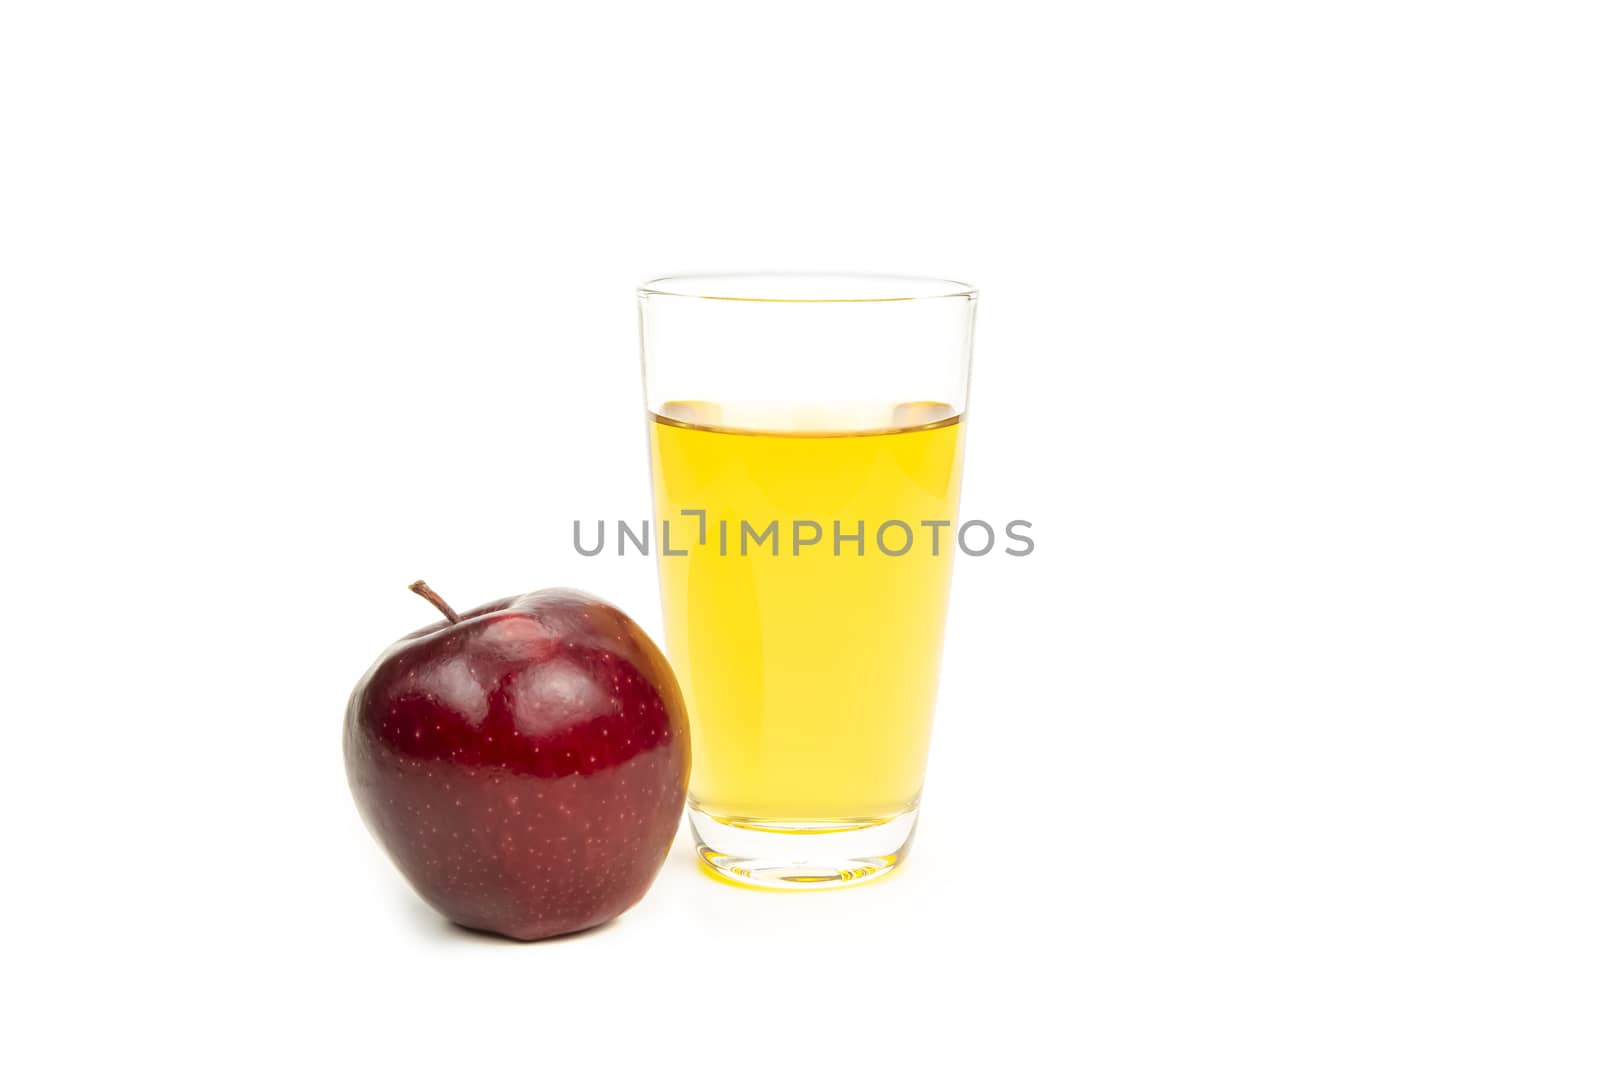 A glass of apple juice by Nawoot